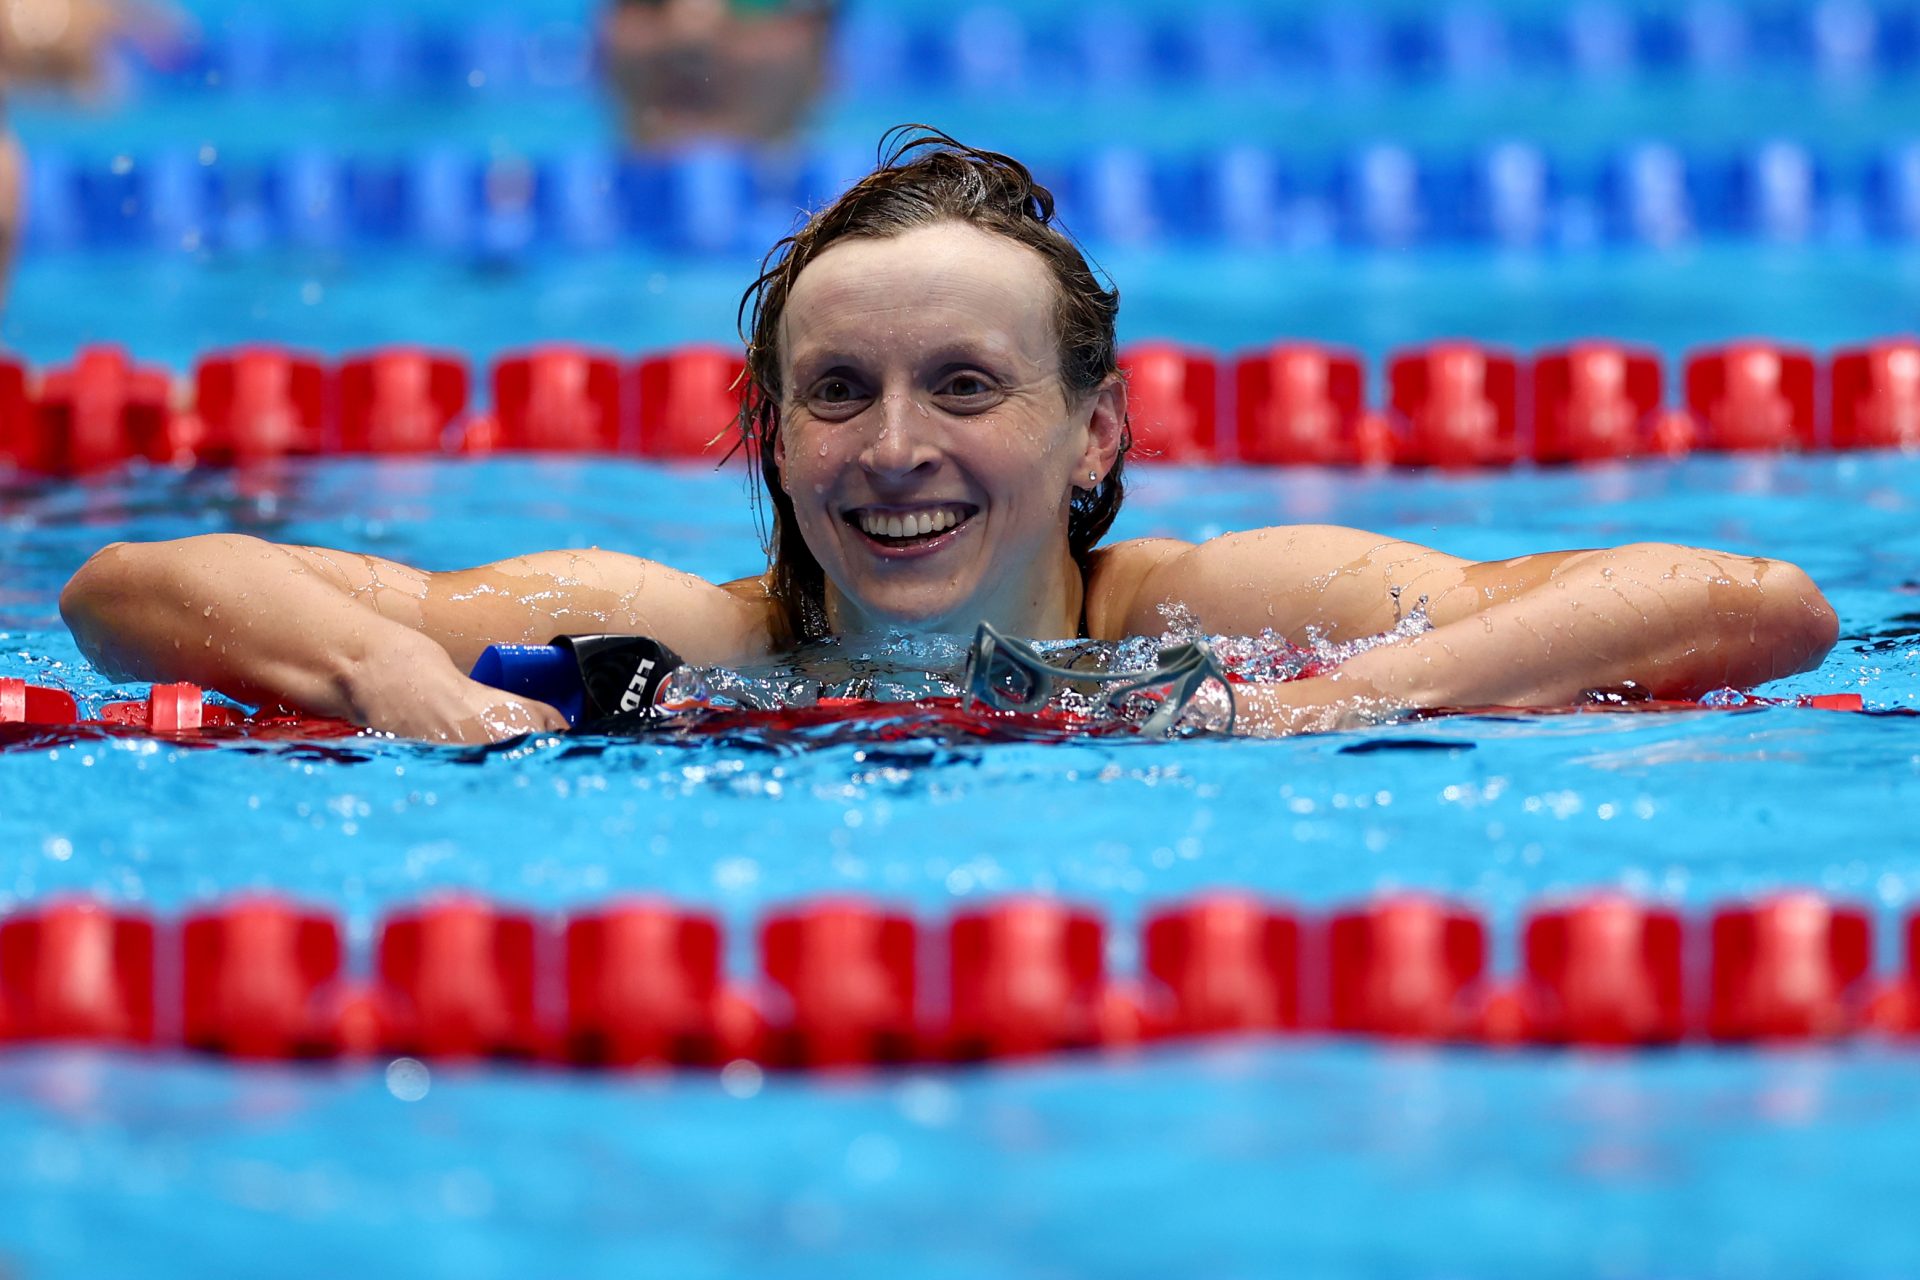 The Duel in the Pool: Can Australia knock the US off their swimming perch?